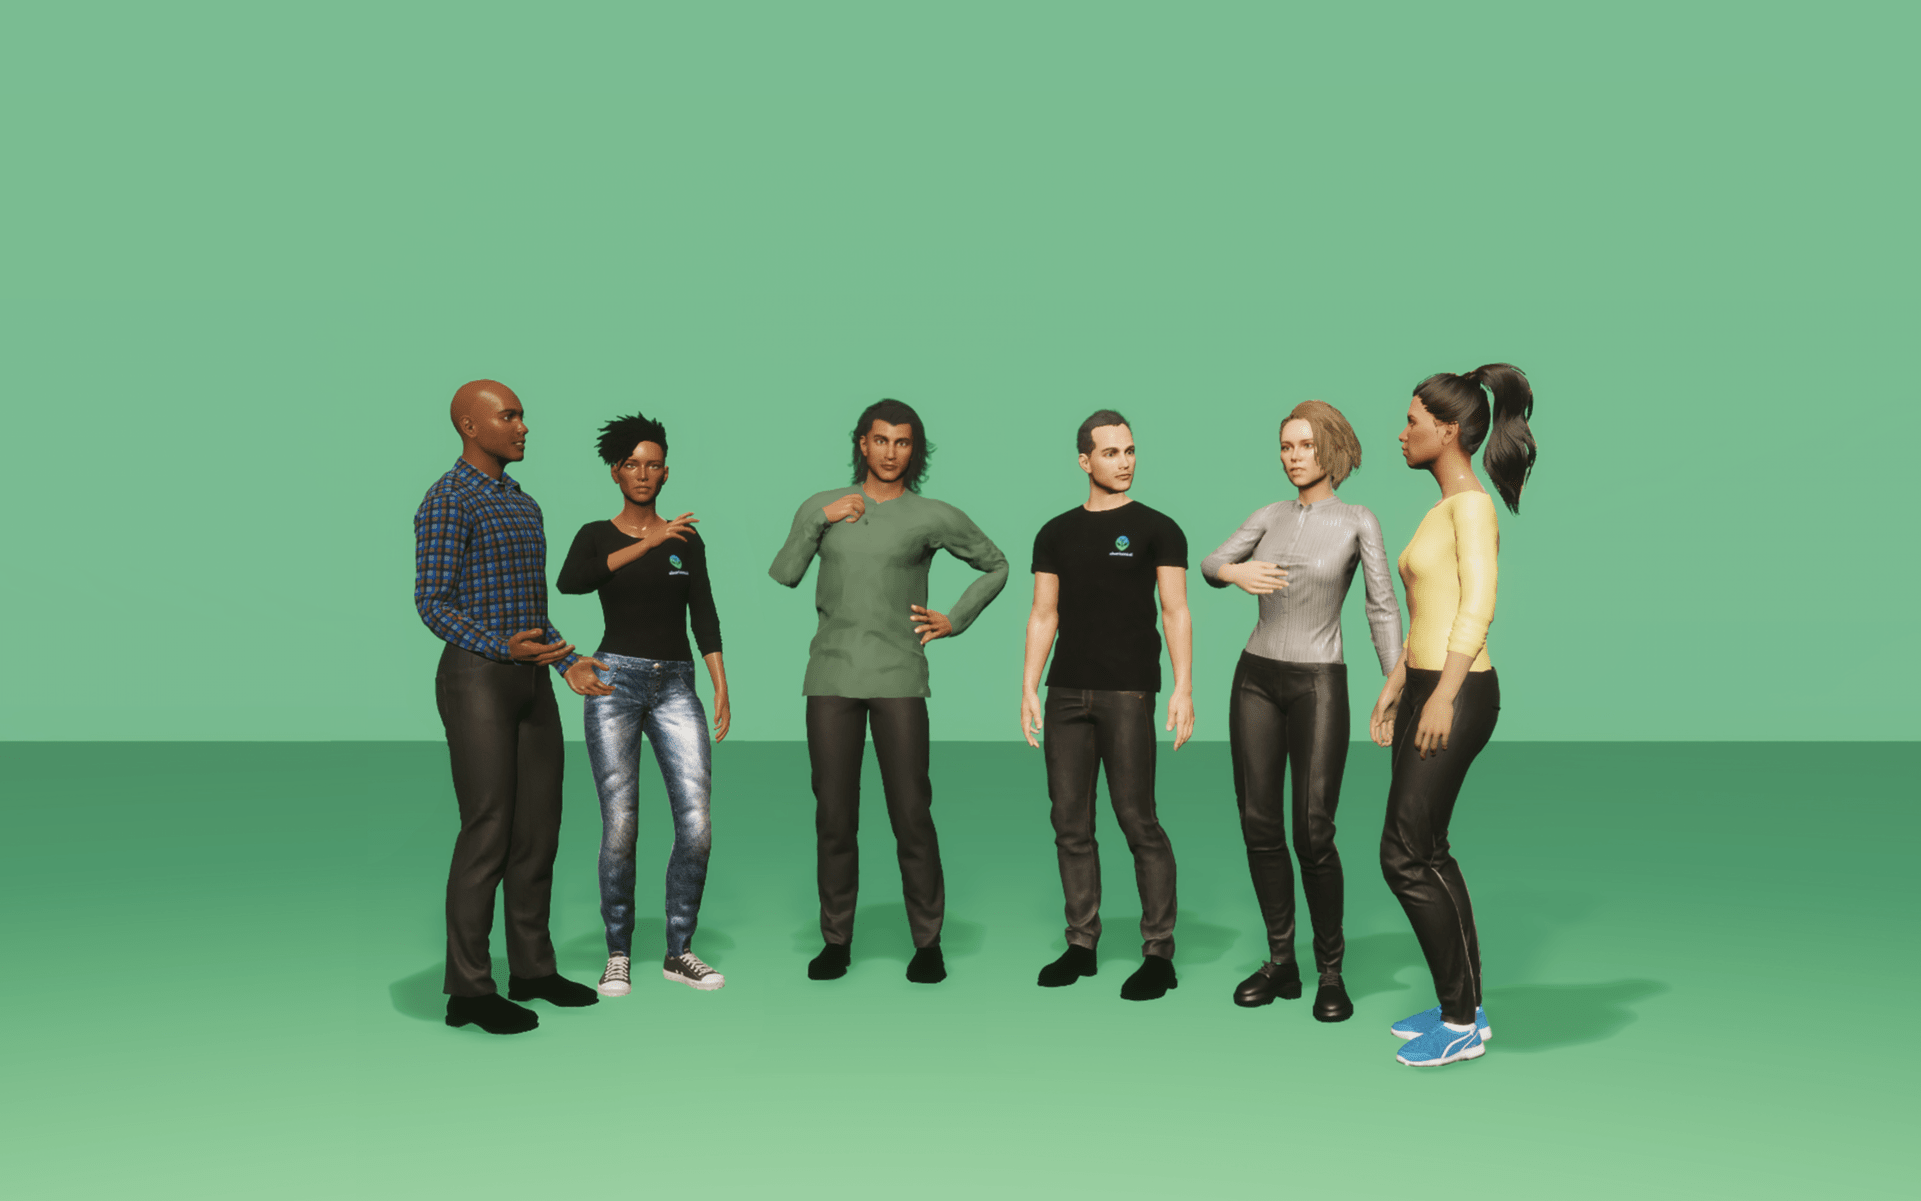 6 different characters front of a green screen.